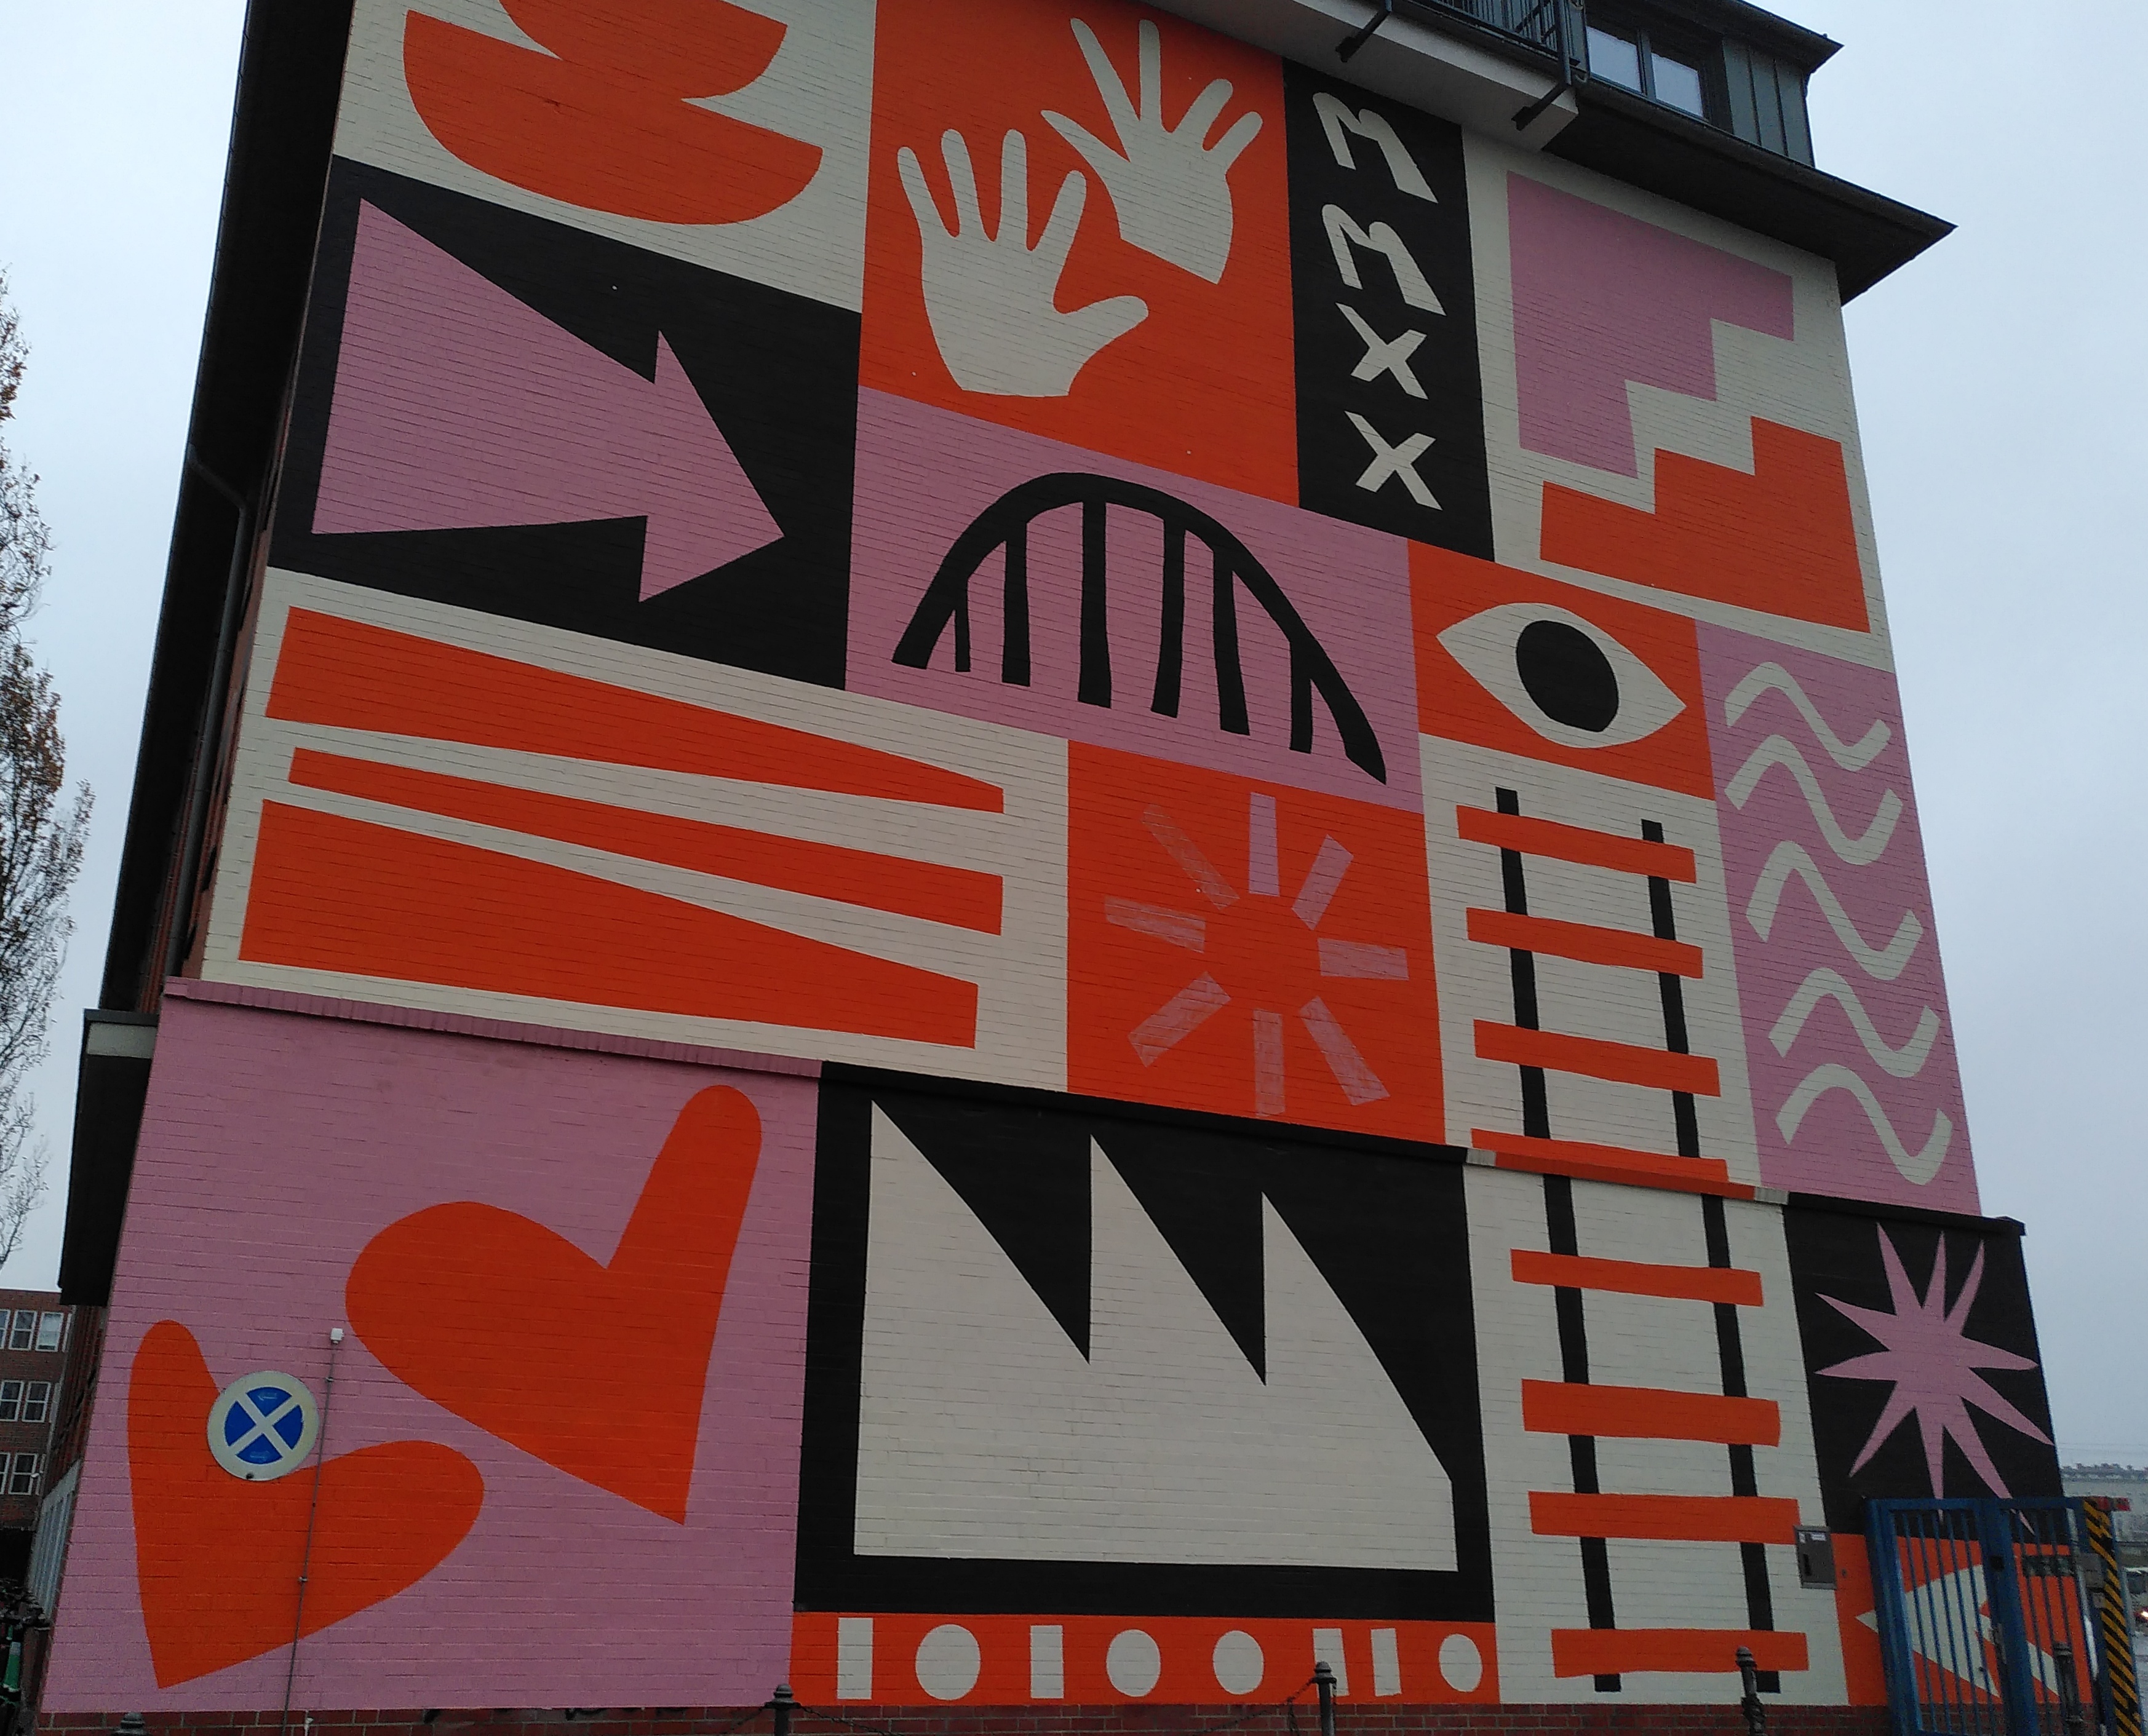 a painted mural on the side of a building. The images are in black, white, red and pink. from the top left: on a white background two half circles stacked, on a red background two white hands, on a blackbackground two letter m's and two letter x's, on a white background pink and orange stairs facing inwards towards each other, on a black background a pink arrow pointing right, on a pink background a black curved bridge, on a red background a white eye with black pupil, on a pink background white squiggly lines, on a white background thick red ramp lines, on a red background a outlines of sun rays in pink, on a white background black train tracks with red sleepers crossing them, on a black background a pink star, on a pink background two red love hearts, on a black background a white jagged outline like a mountain range, then a red backgroud with lines and dots.